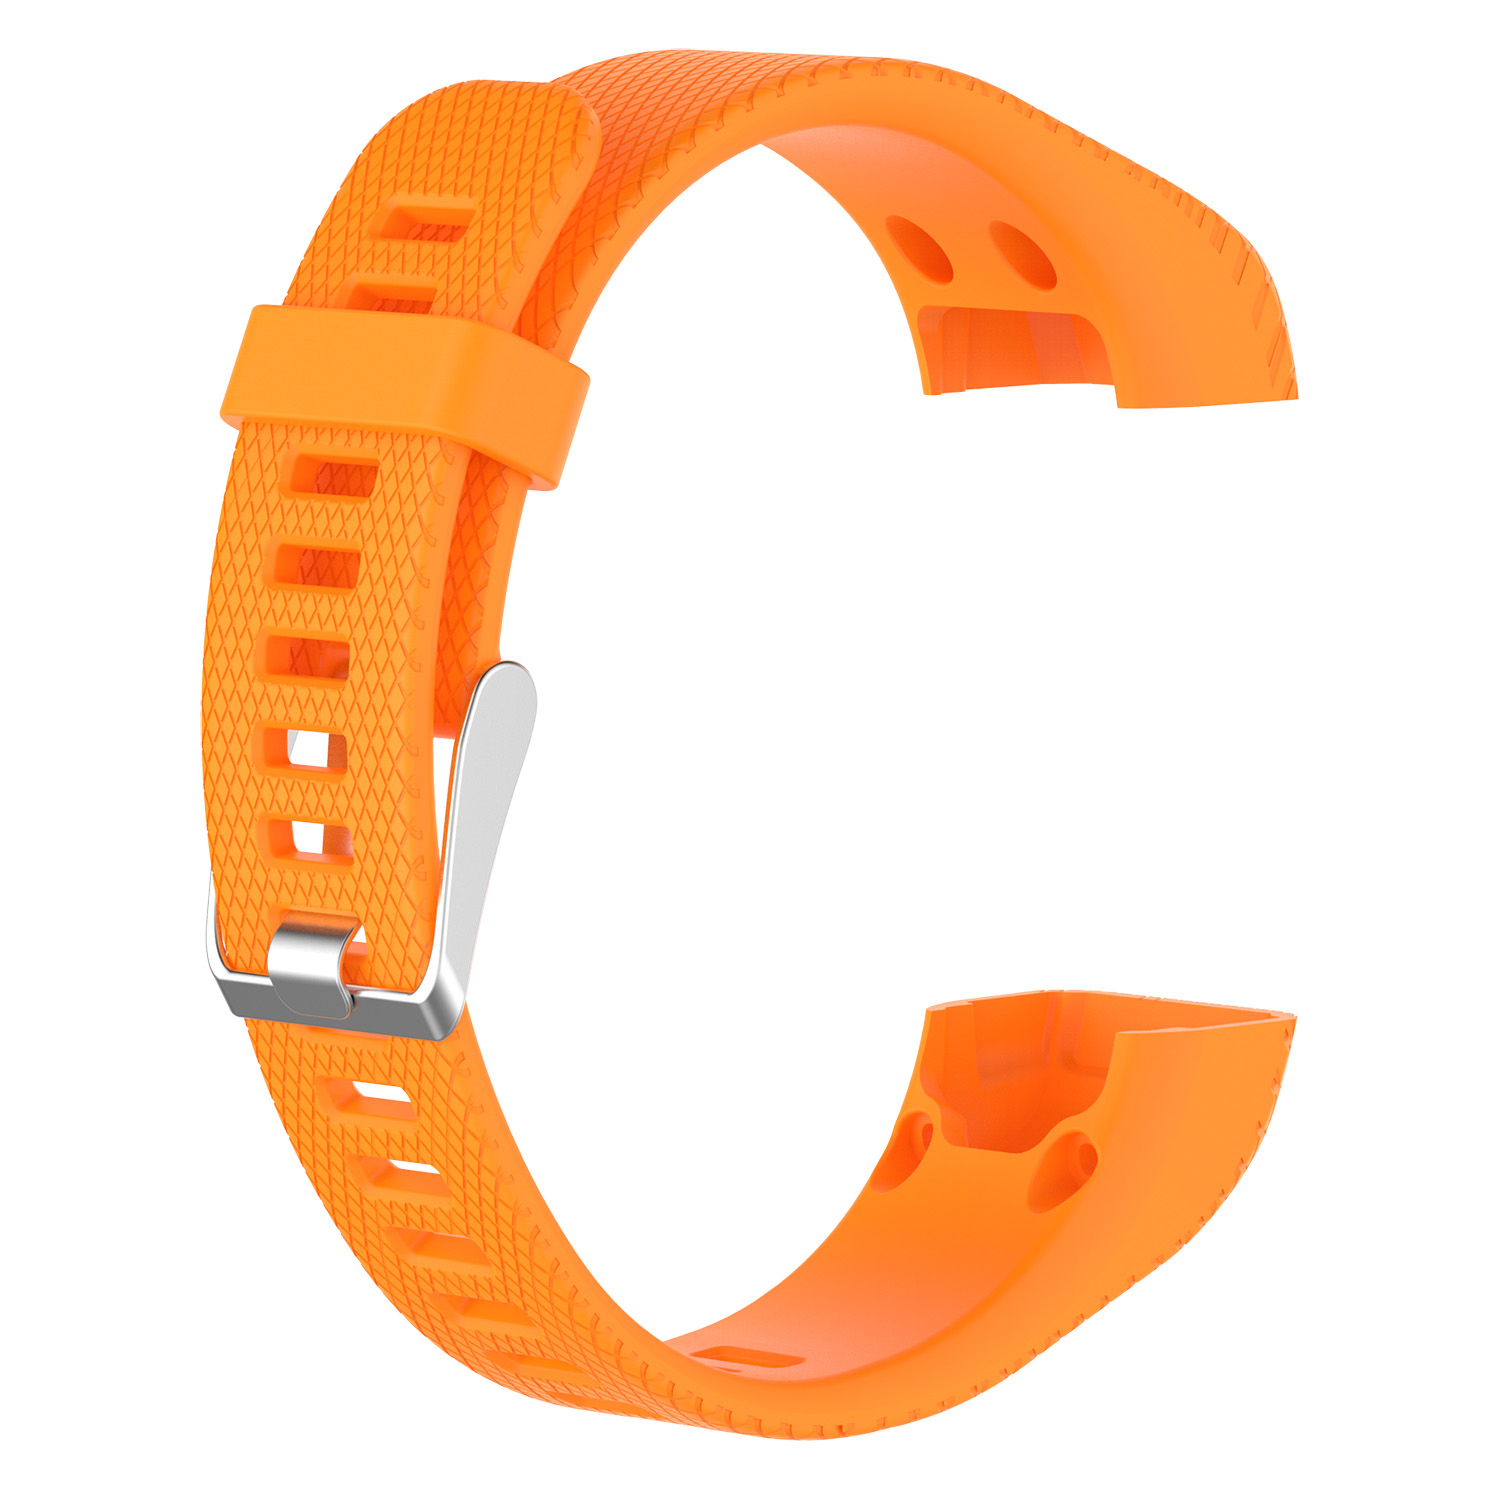 Bakeey-Texture-Silicone-Replacement-Strap-Smart-Watch-Band-For-Garmin-Vivosmart-HRApproach-X10X40-1739176-3